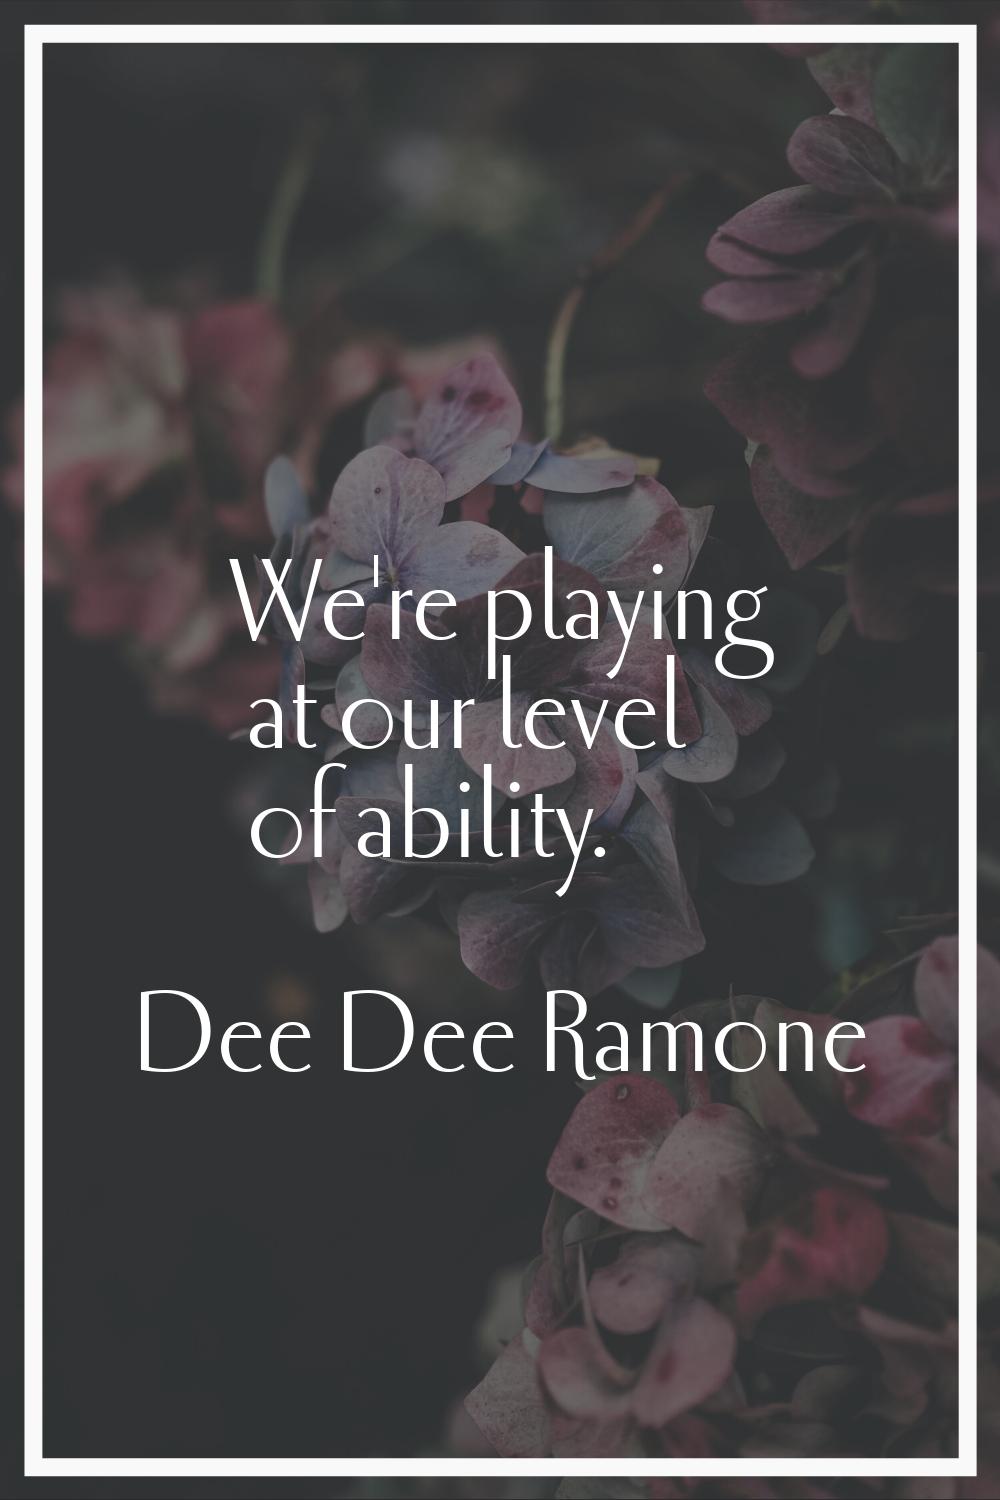 We're playing at our level of ability.